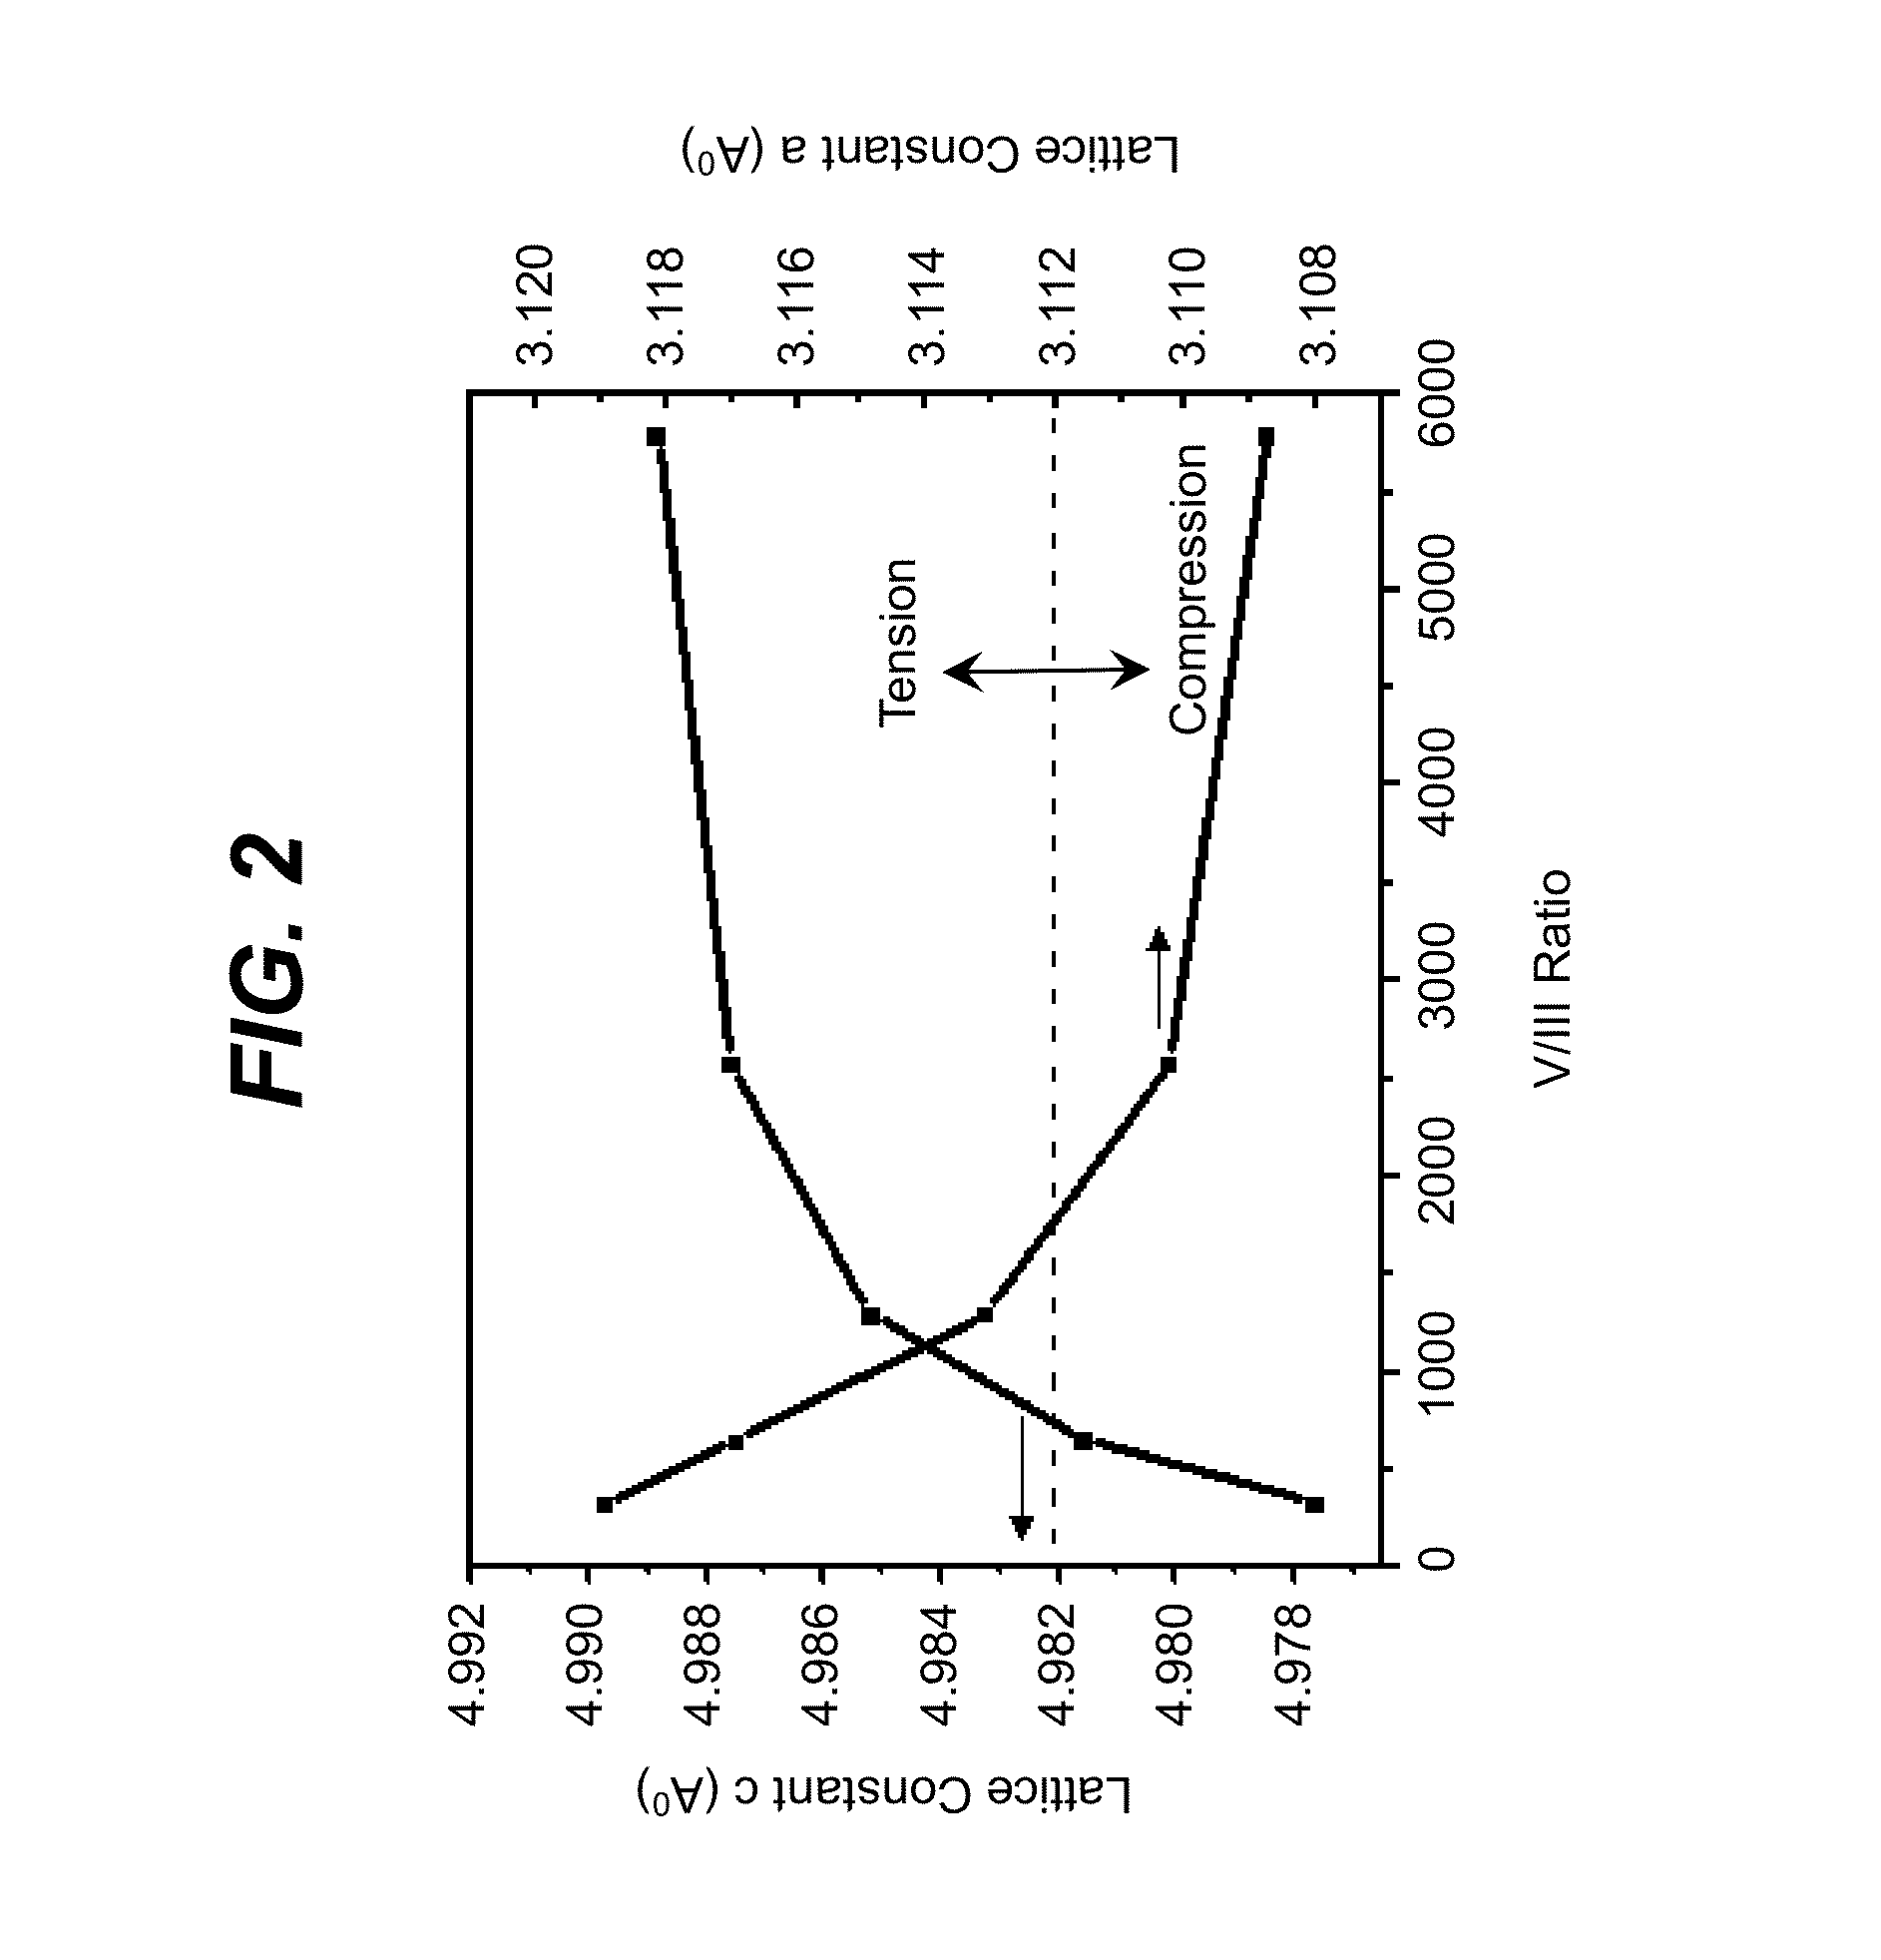 Epitaxy Technique for Growing Semiconductor Compounds